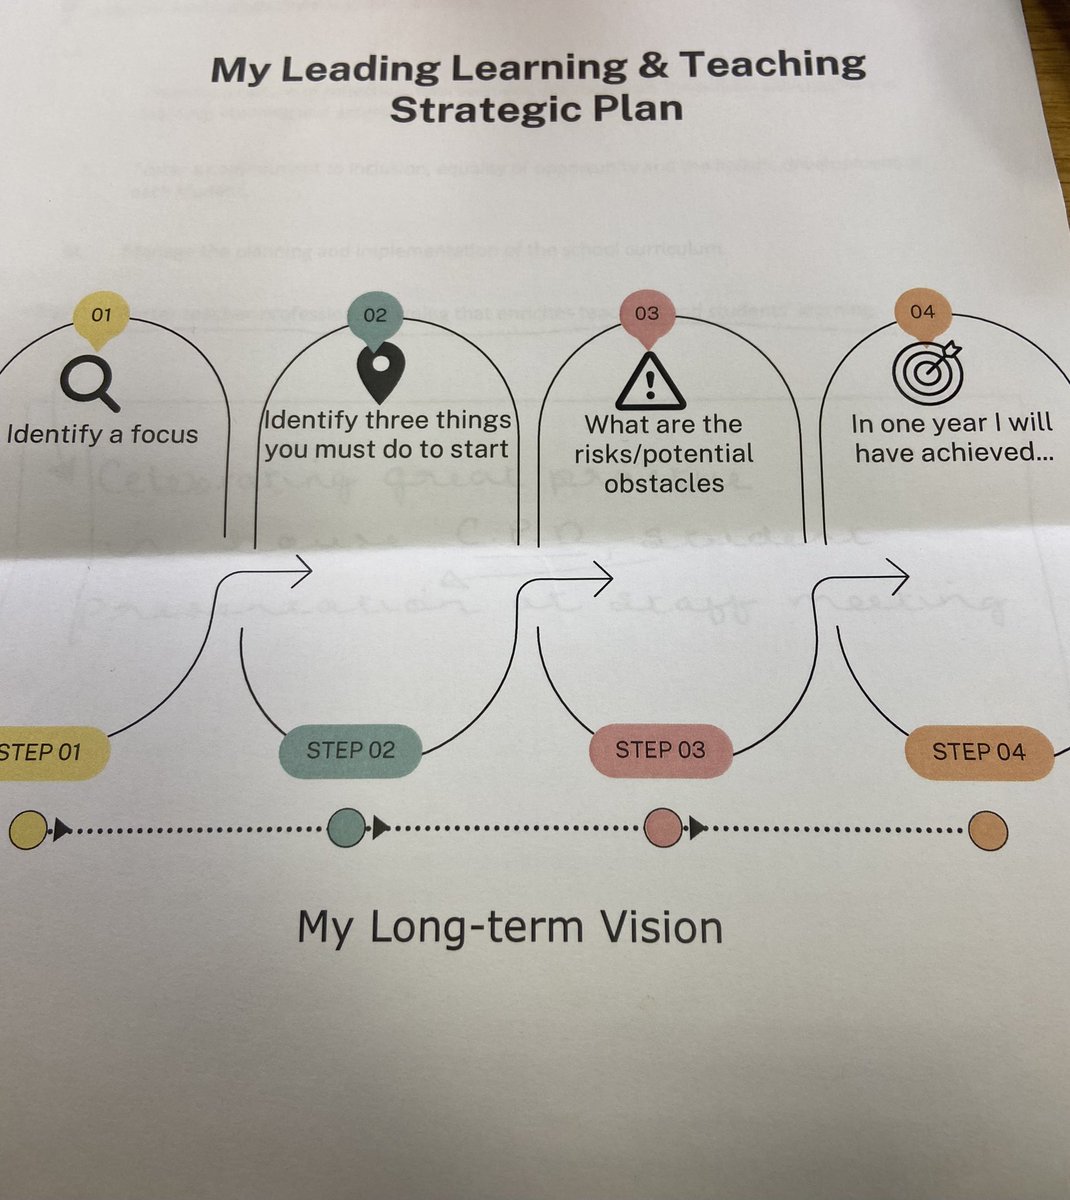 Feeling very motivated after @mickweafer Teaching & Learning workshop. Many thanks for sharing this strategic plan template, a great visual aid for informing the planning process. #ETBIsummerschool @ETBIreland @ddletb